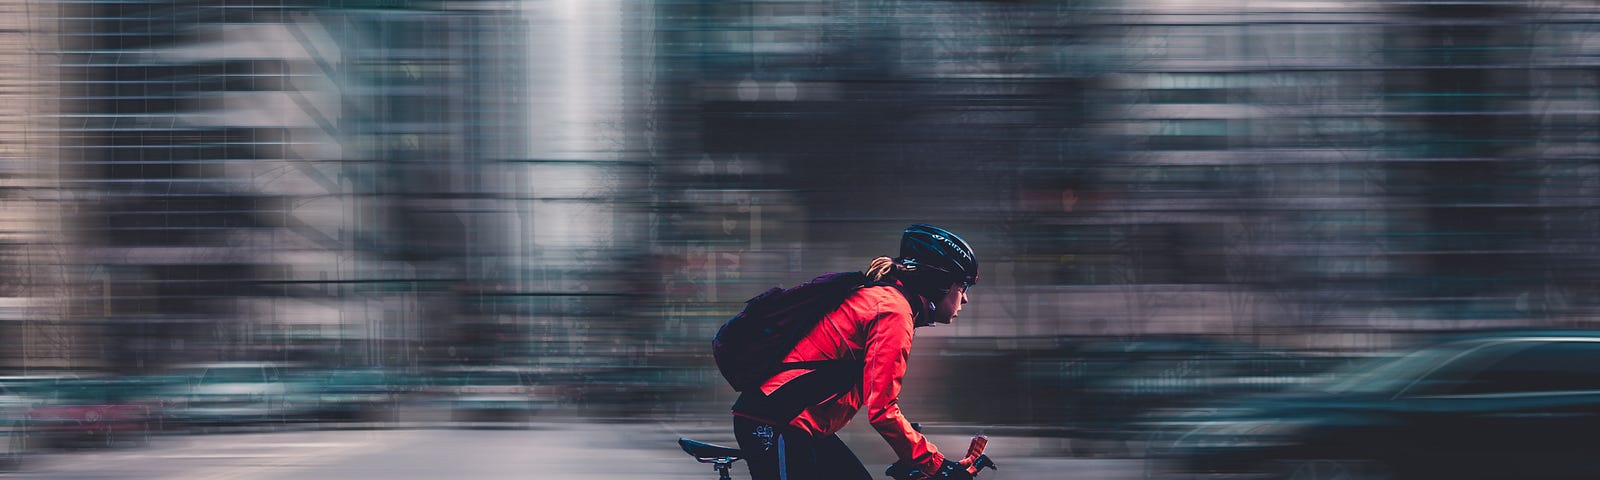 Person rides a bicycle in the city. Background blurred.